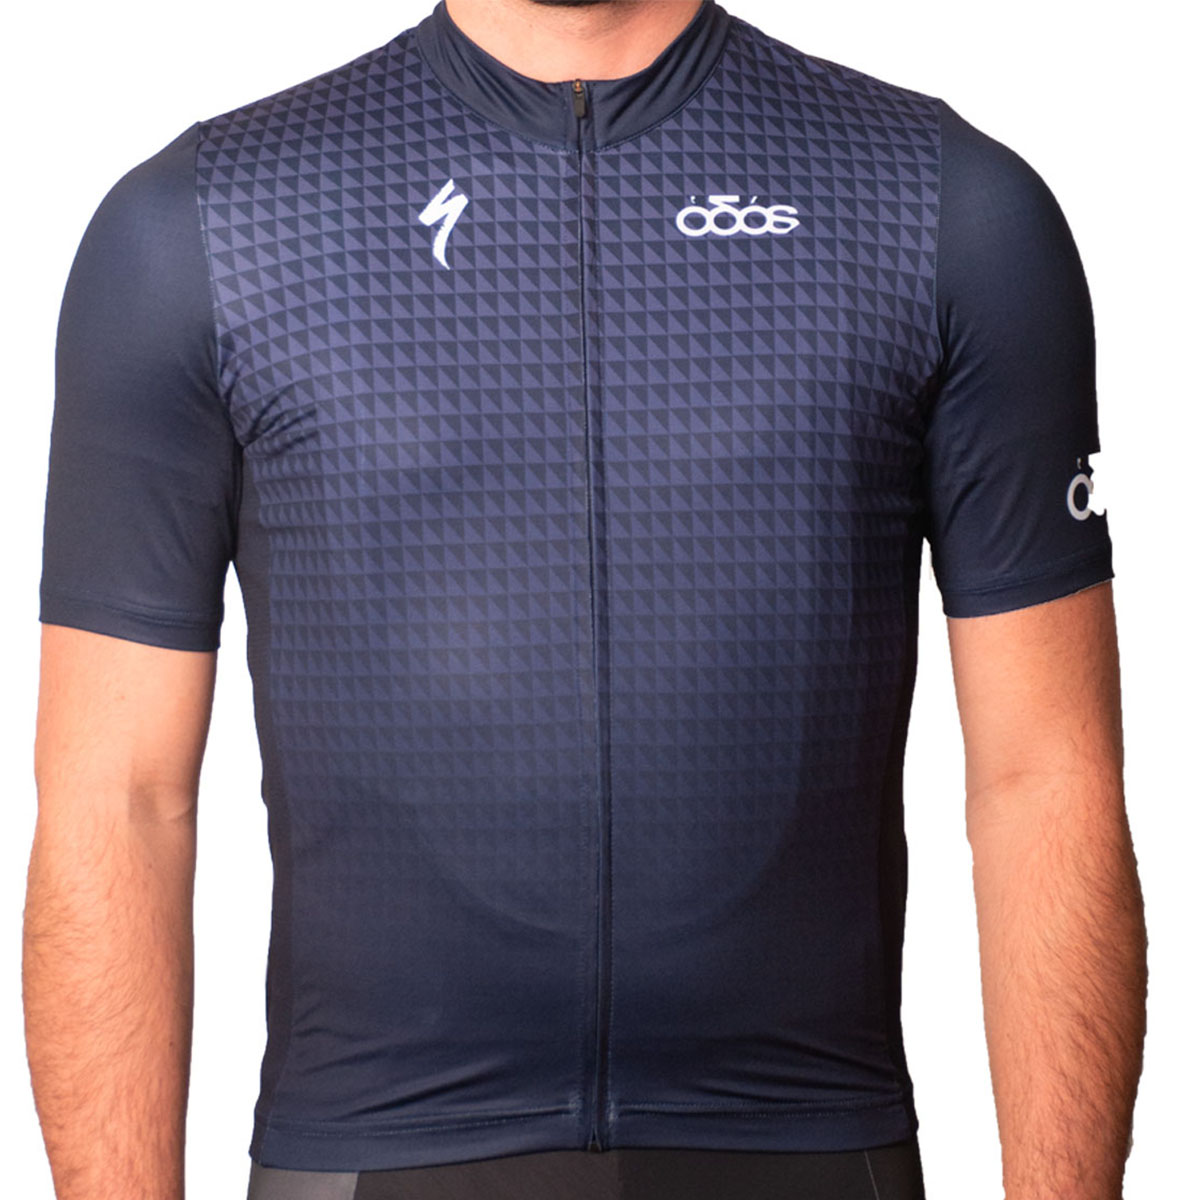  MAILLOT ODOS HOMME 2.0